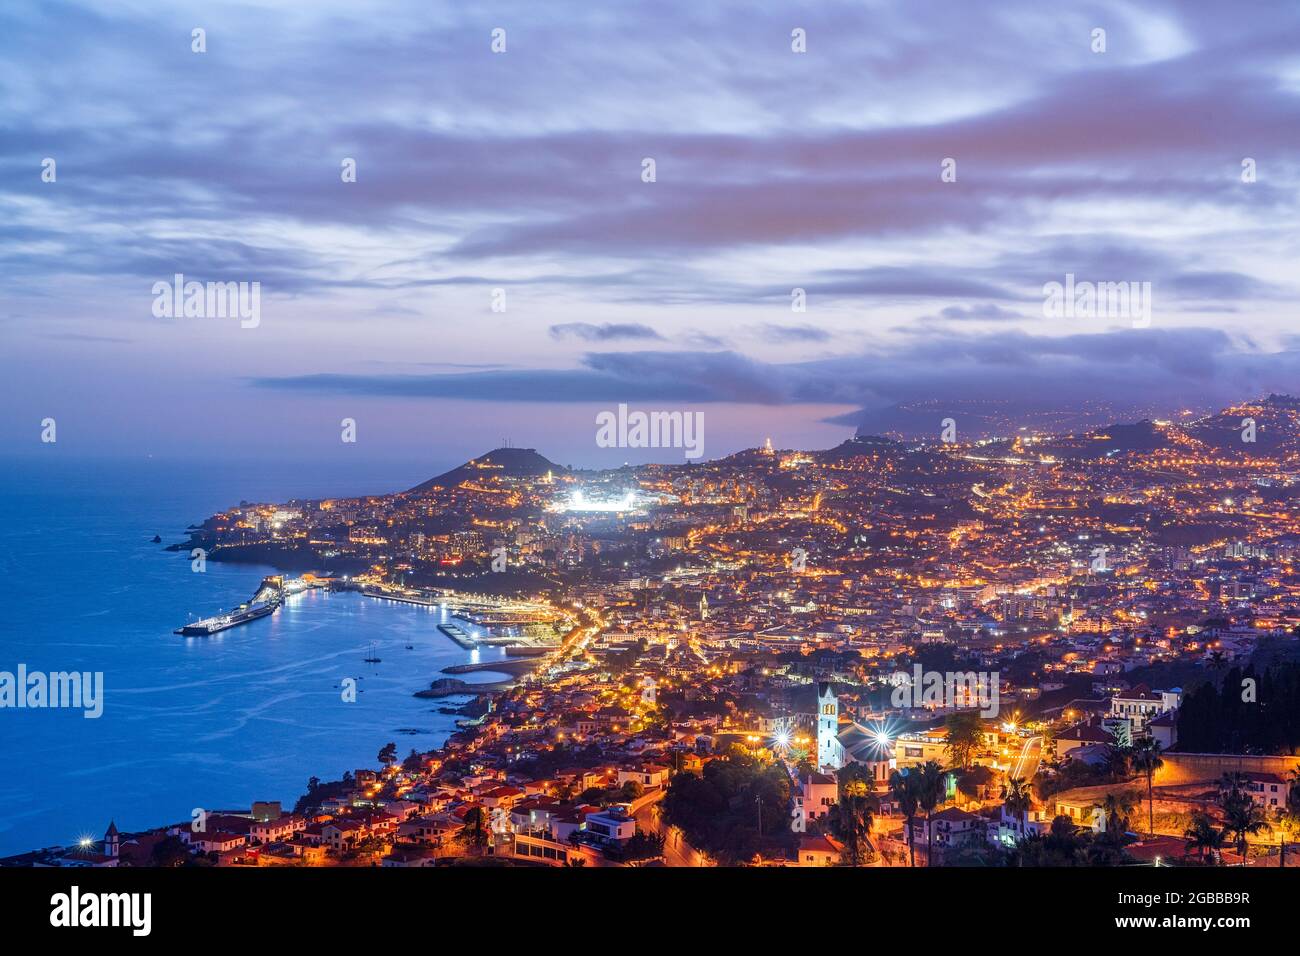 Dusk over the iIluminated city of Funchal viewed from Sao Goncalo, Madeira island, Portugal, Atlantic, Europe Stock Photo